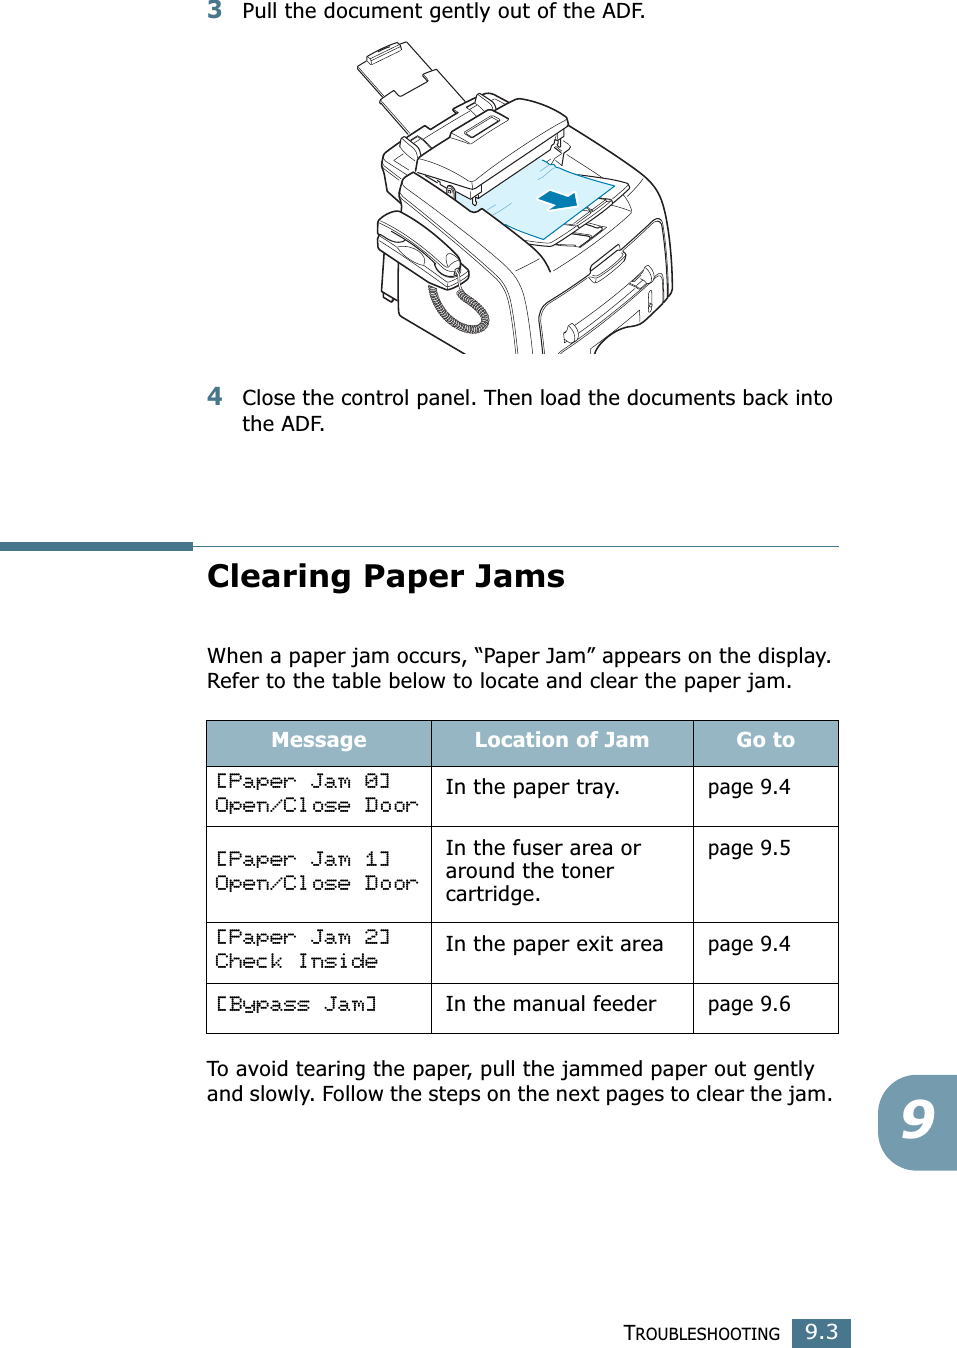 TROUBLESHOOTING9.393Pull the document gently out of the ADF.4Close the control panel. Then load the documents back into the ADF.Clearing Paper JamsWhen a paper jam occurs, “Paper Jam” appears on the display. Refer to the table below to locate and clear the paper jam.To avoid tearing the paper, pull the jammed paper out gently and slowly. Follow the steps on the next pages to clear the jam. Message Location of Jam Go to[Paper Jam 0]Open/Close DoorIn the paper tray.page 9.4[Paper Jam 1]Open/Close DoorIn the fuser area or around the toner cartridge.page 9.5[Paper Jam 2]Check InsideIn the paper exit areapage 9.4[Bypass Jam]In the manual feederpage 9.6